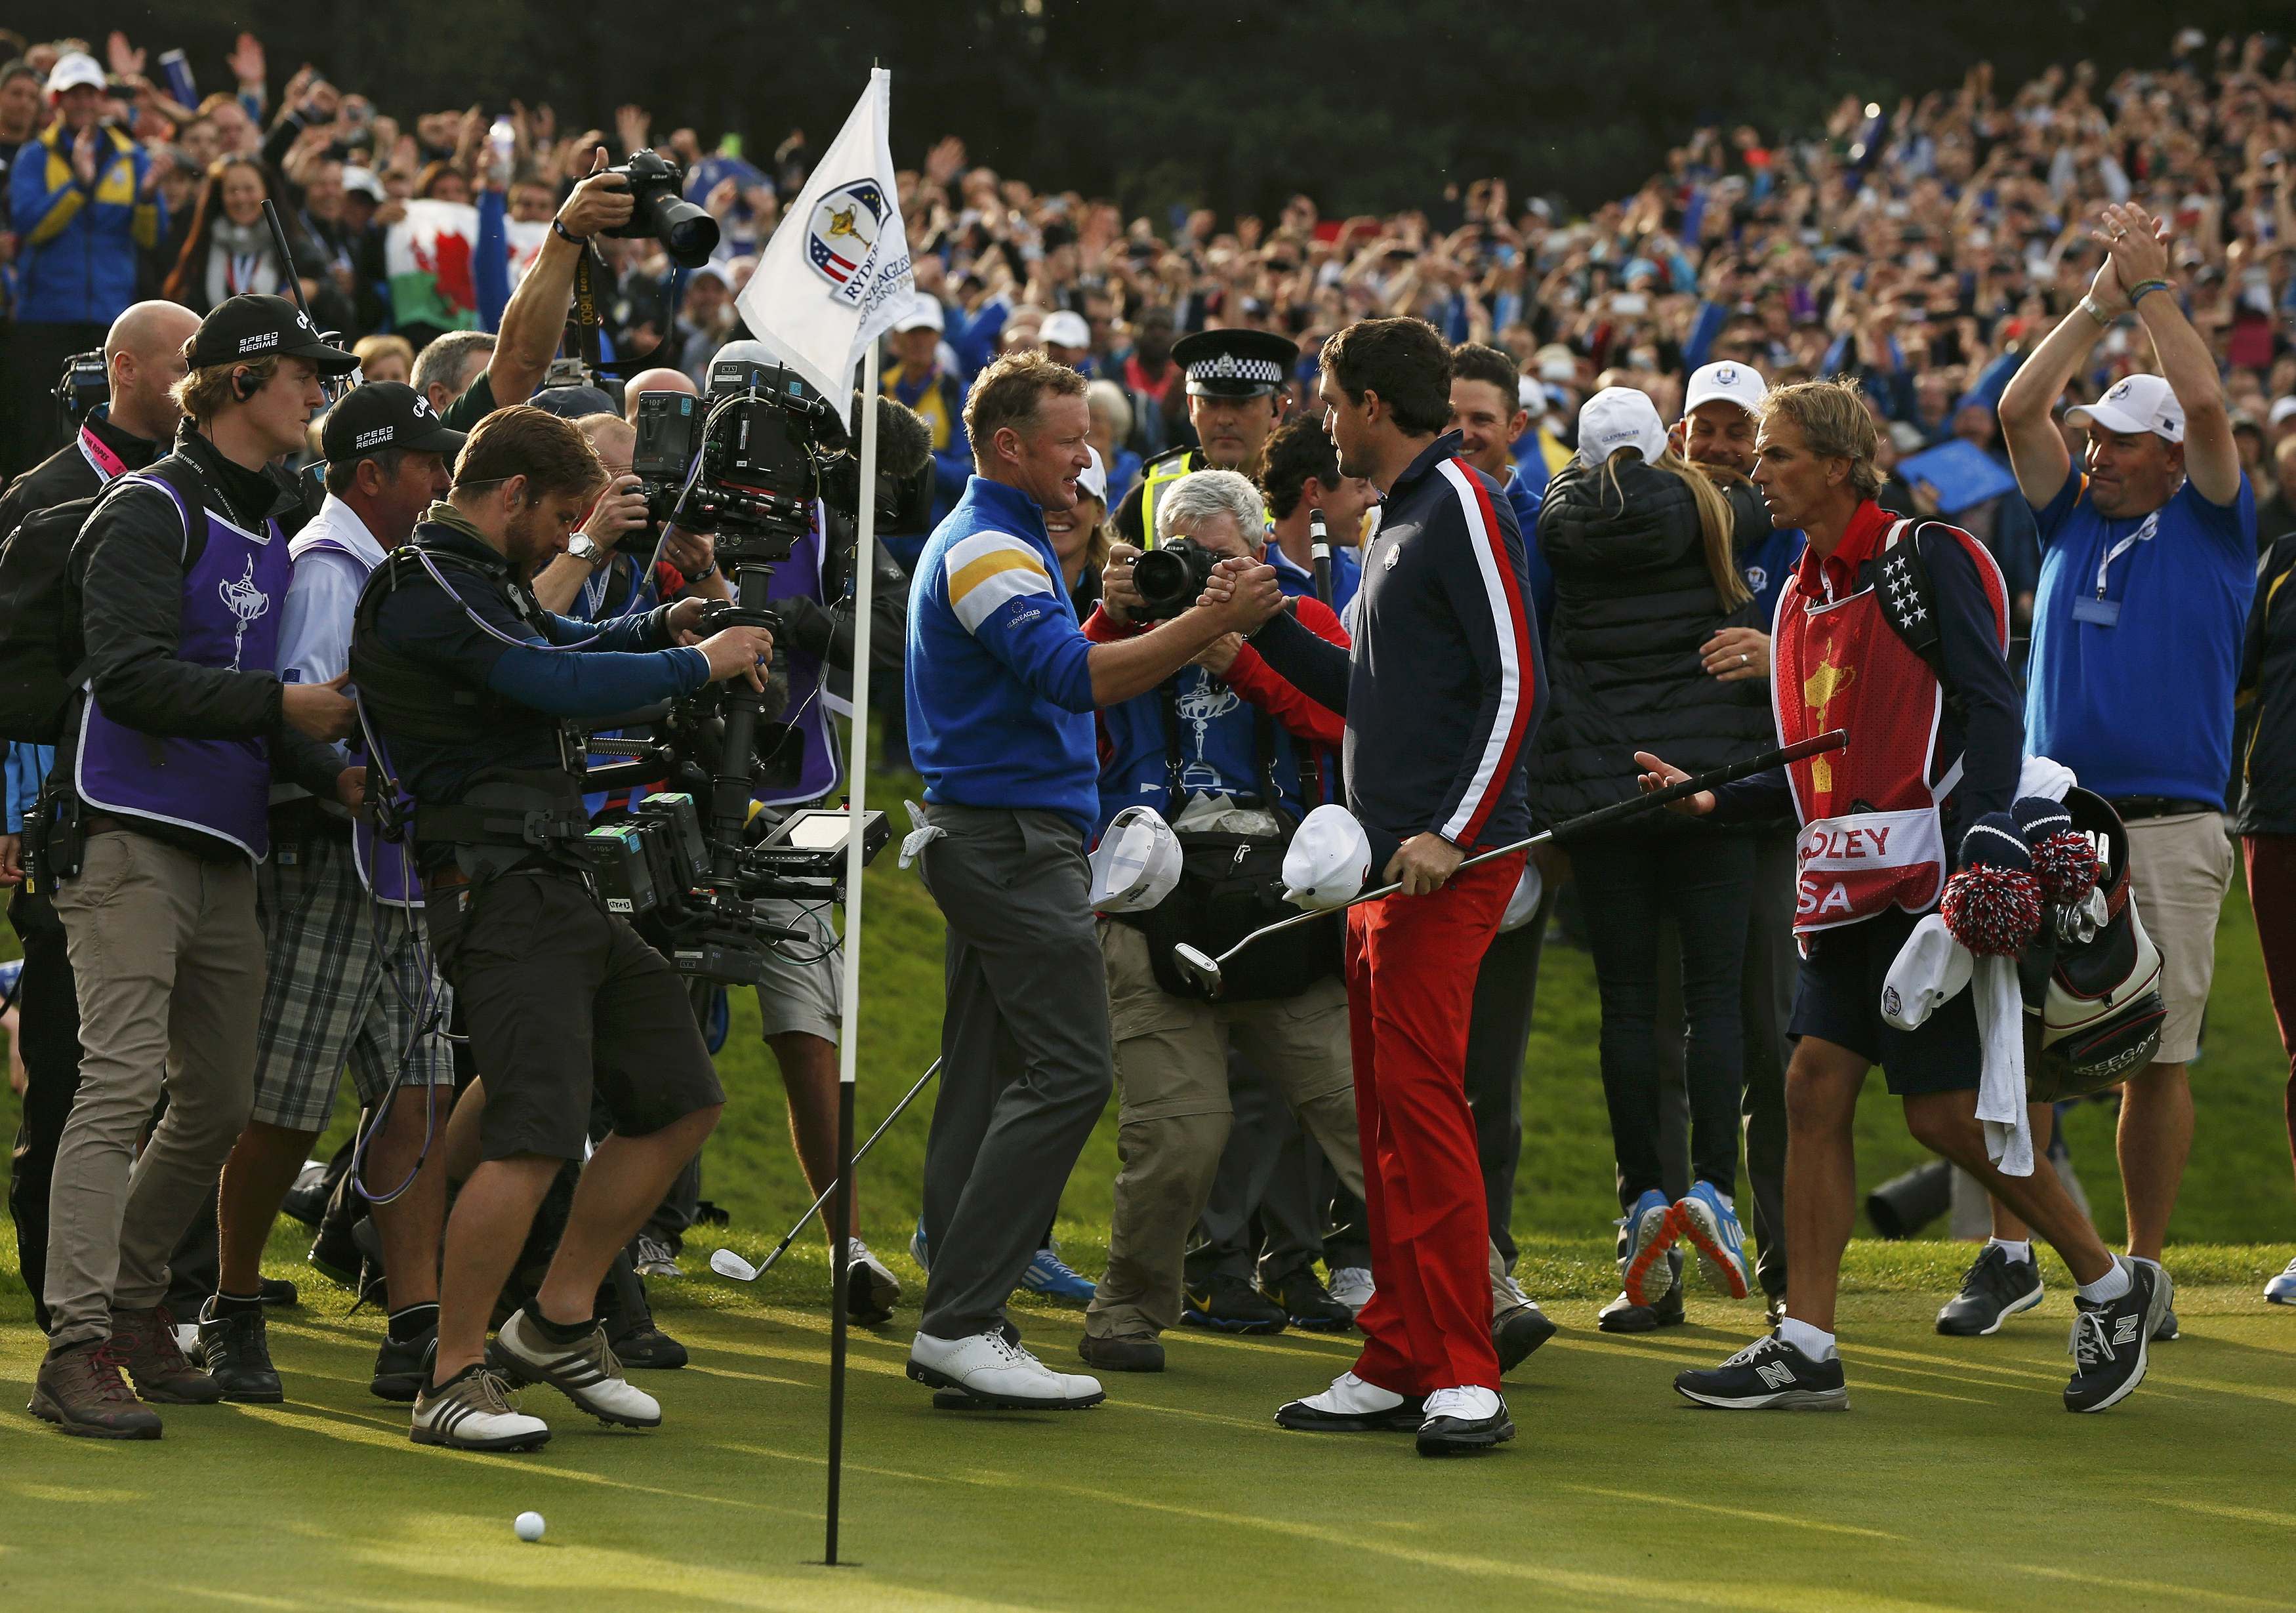 Europe celebrates Ryder Cup victory